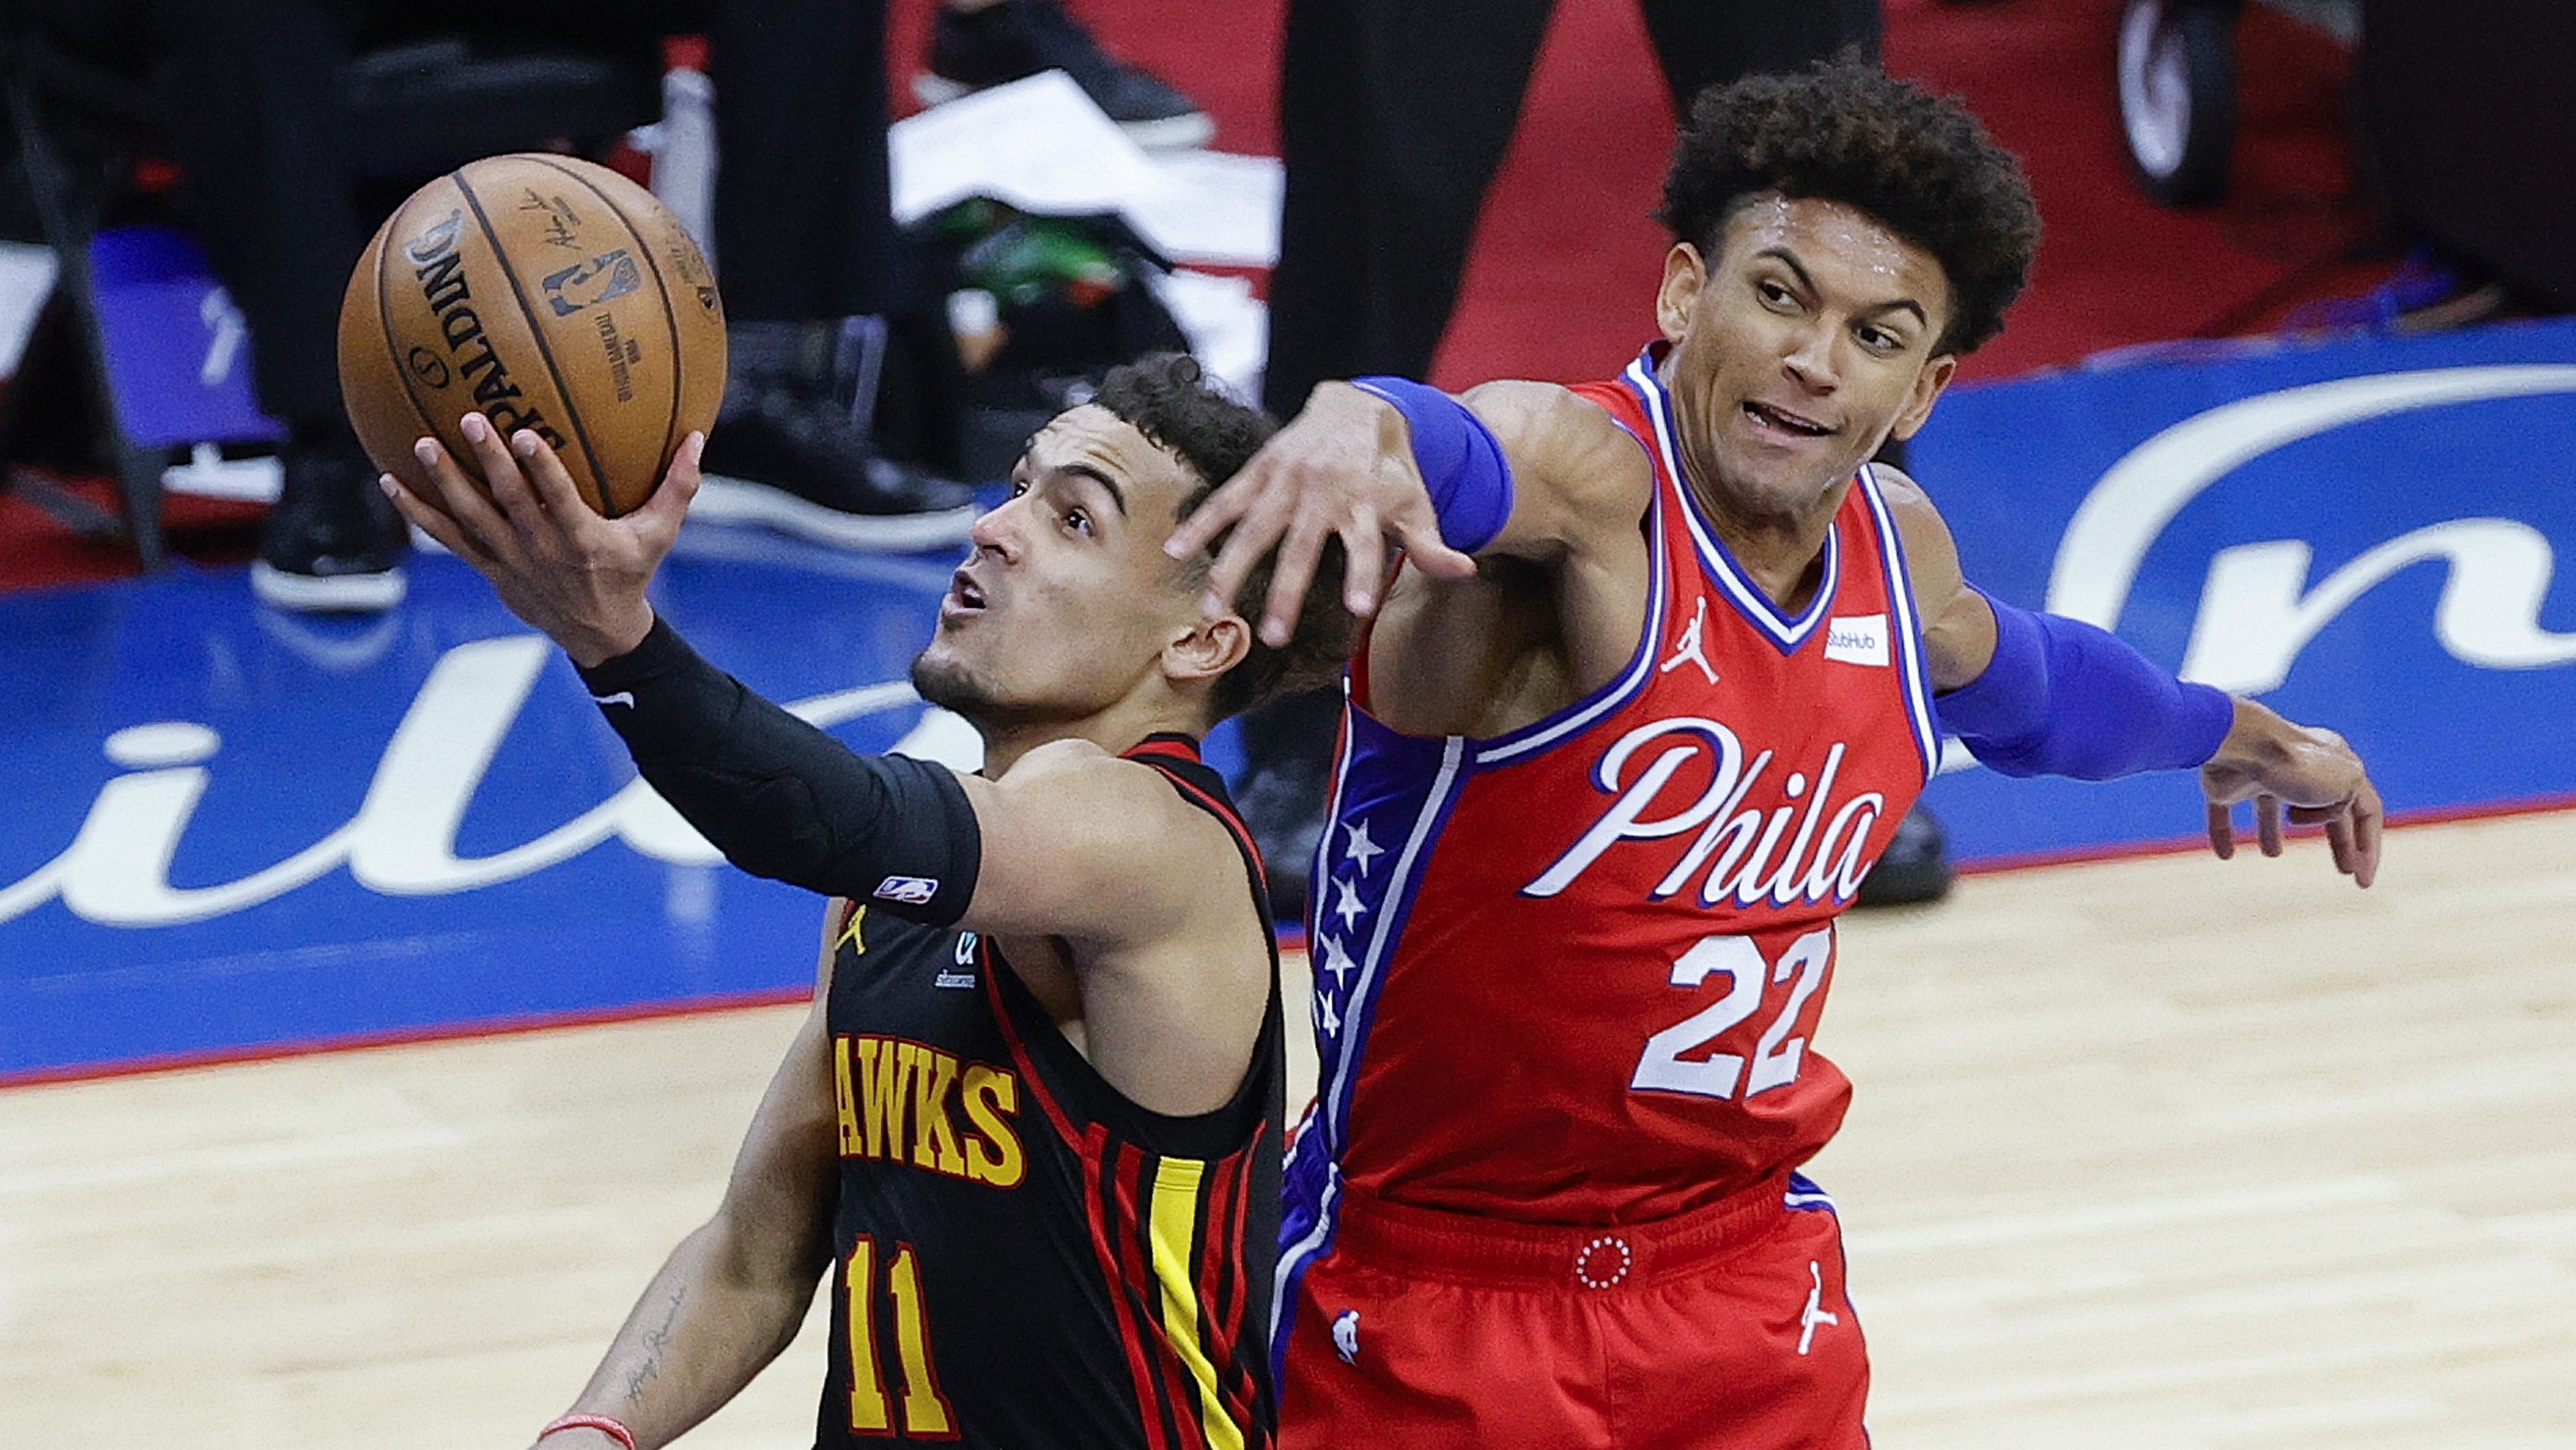 Hawks Vs 76ers Live Stream How To Watch The Nba Playoffs Game 2 Online Tom S Guide